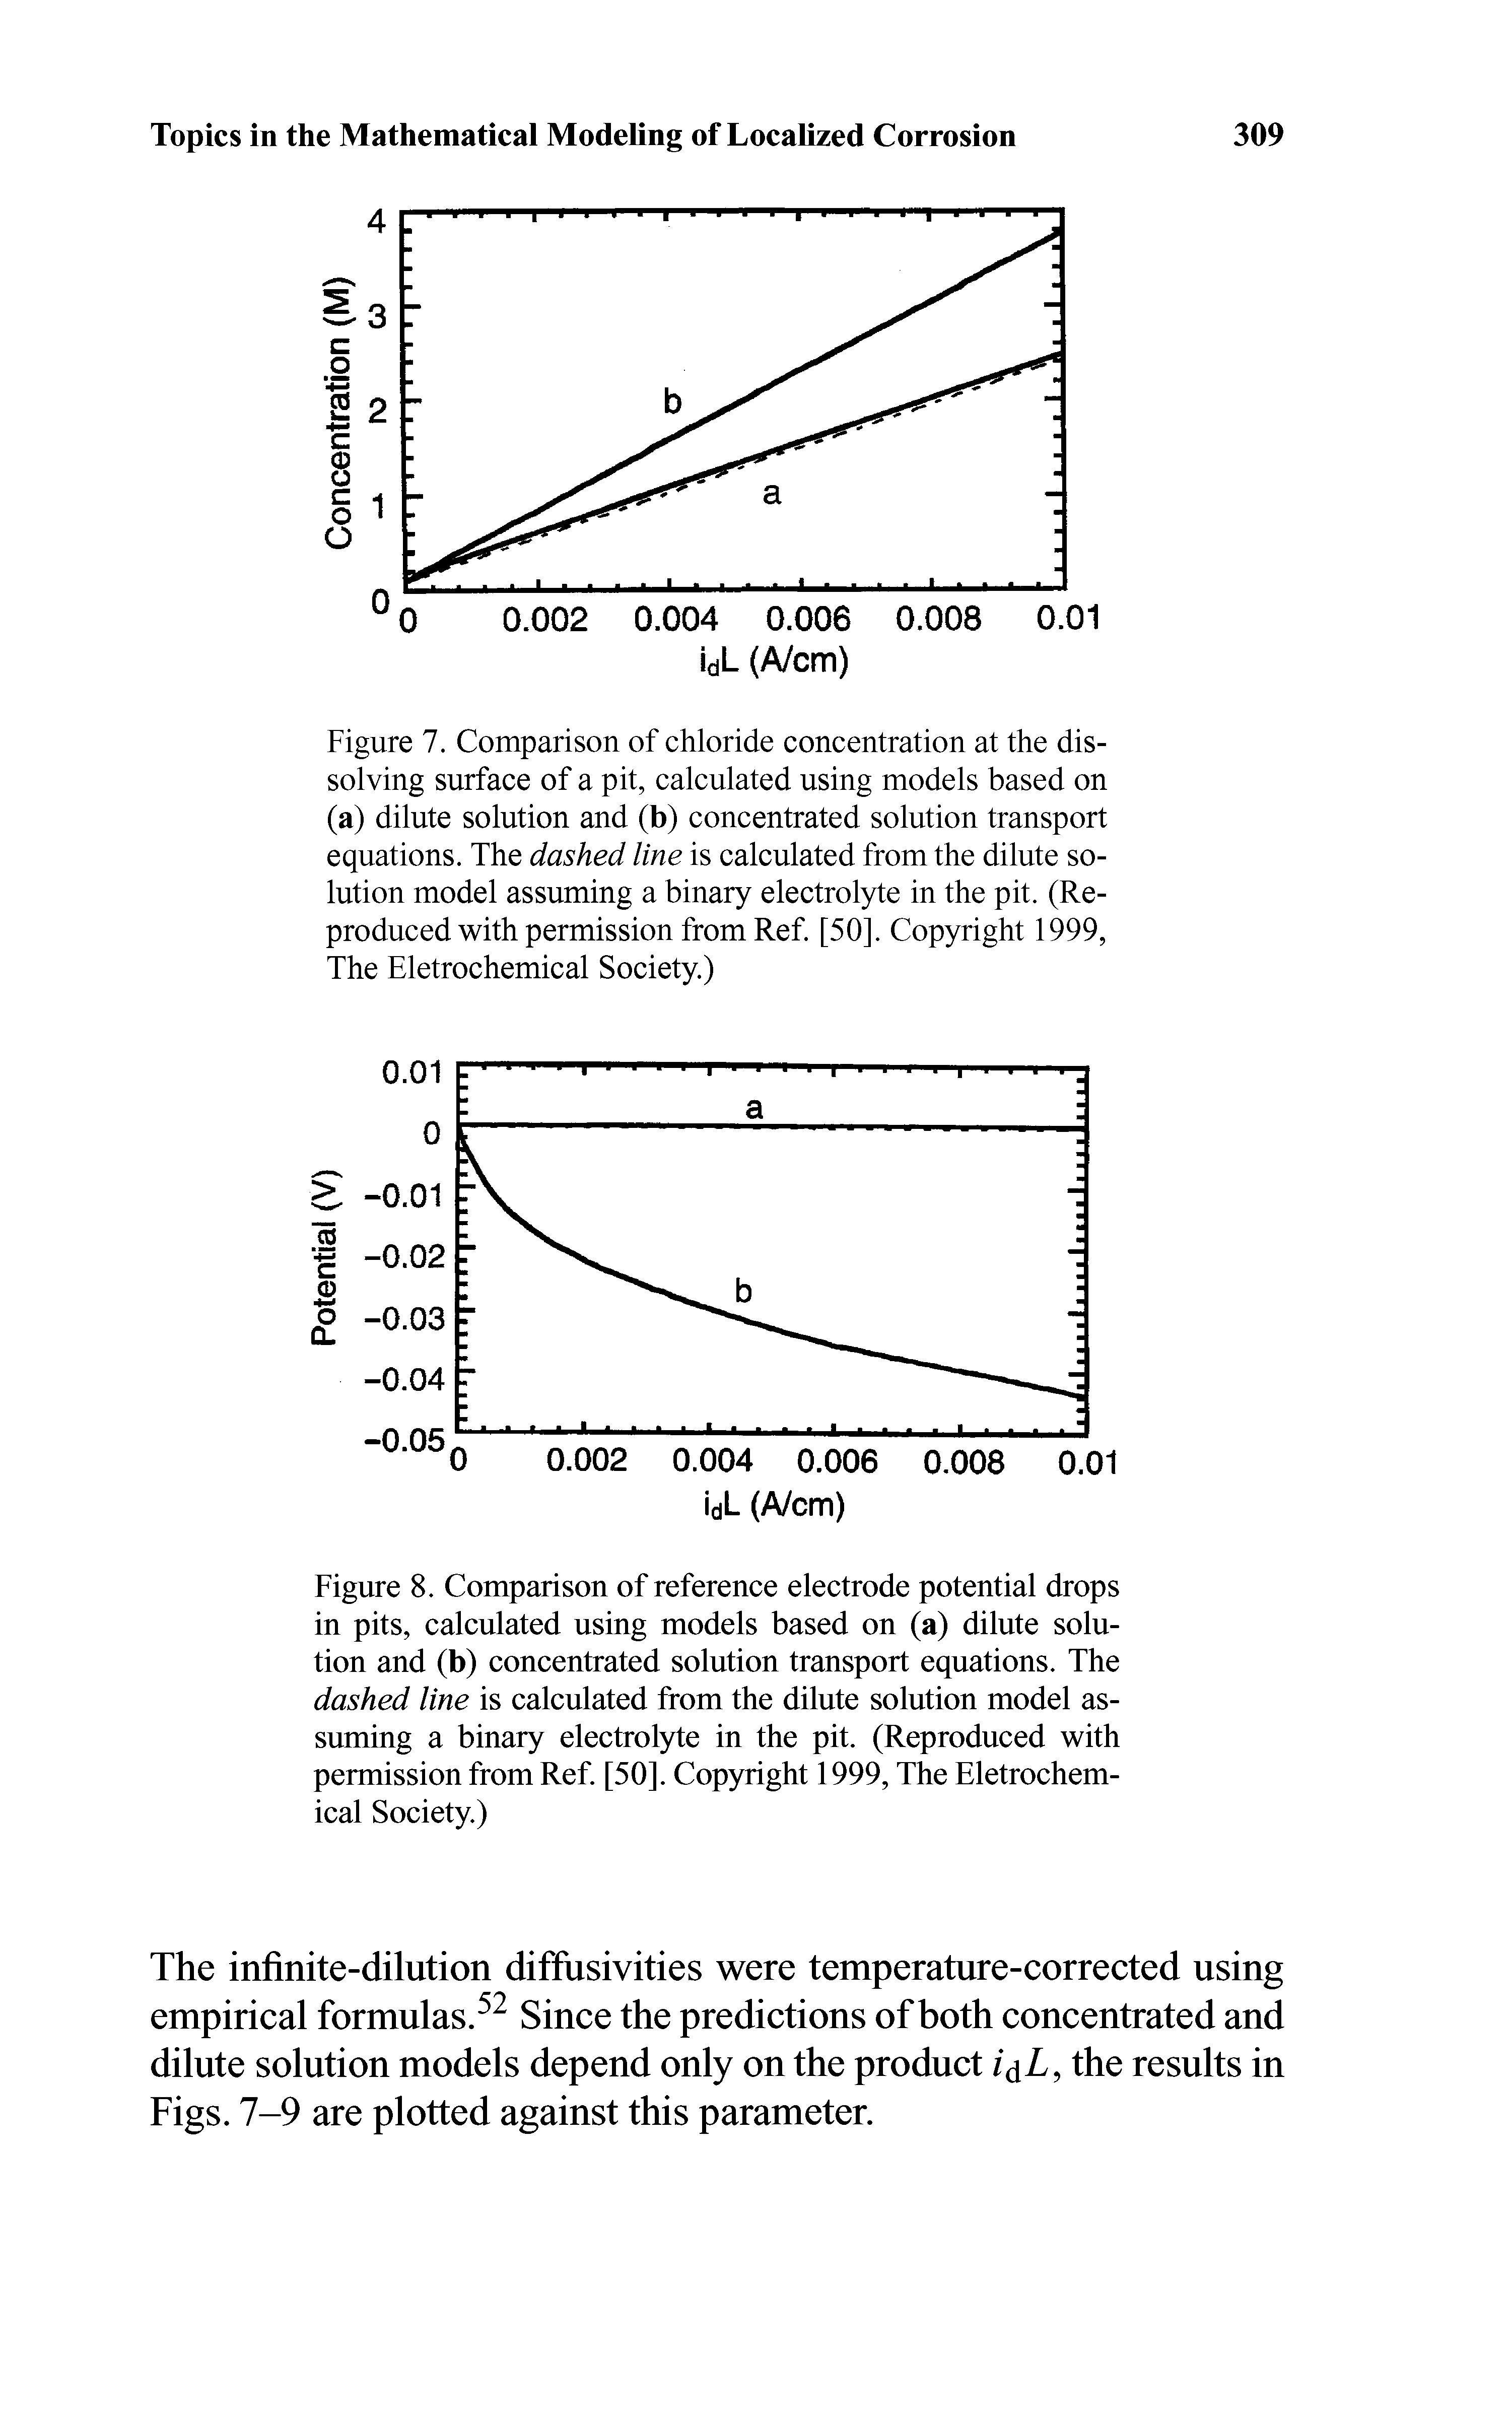 Figure 7. Comparison of chloride concentration at the dissolving surface of a pit, calculated using models based on (a) dilute solution and (b) concentrated solution transport equations. The dashed line is calculated from the dilute solution model assuming a binary electrolyte in the pit. (Reproduced with permission from Ref. [50]. Copyright 1999, The Eletrochemical Society.)...